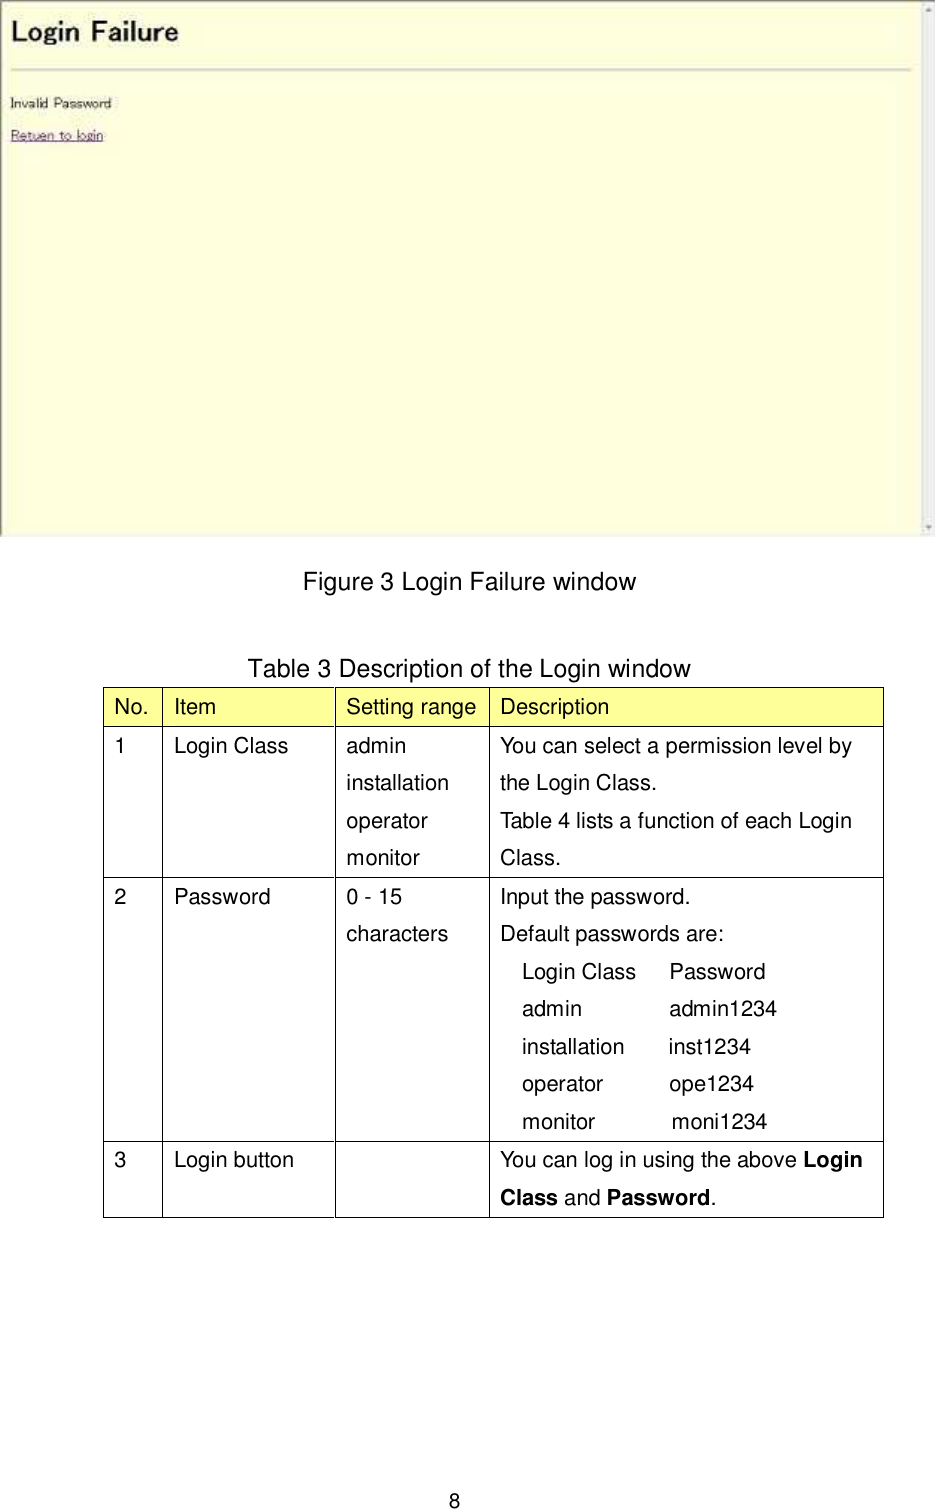    8  Figure 3 Login Failure window  Table 3 Description of the Login window No. Item  Setting range Description 1  Login Class  admin installation operator monitor You can select a permission level by the Login Class. Table 4 lists a function of each Login Class. 2  Password  0 - 15 characters Input the password. Default passwords are: Login Class      Password admin                admin1234 installation        inst1234 operator            ope1234 monitor              moni1234 3  Login button    You can log in using the above Login Class and Password.  